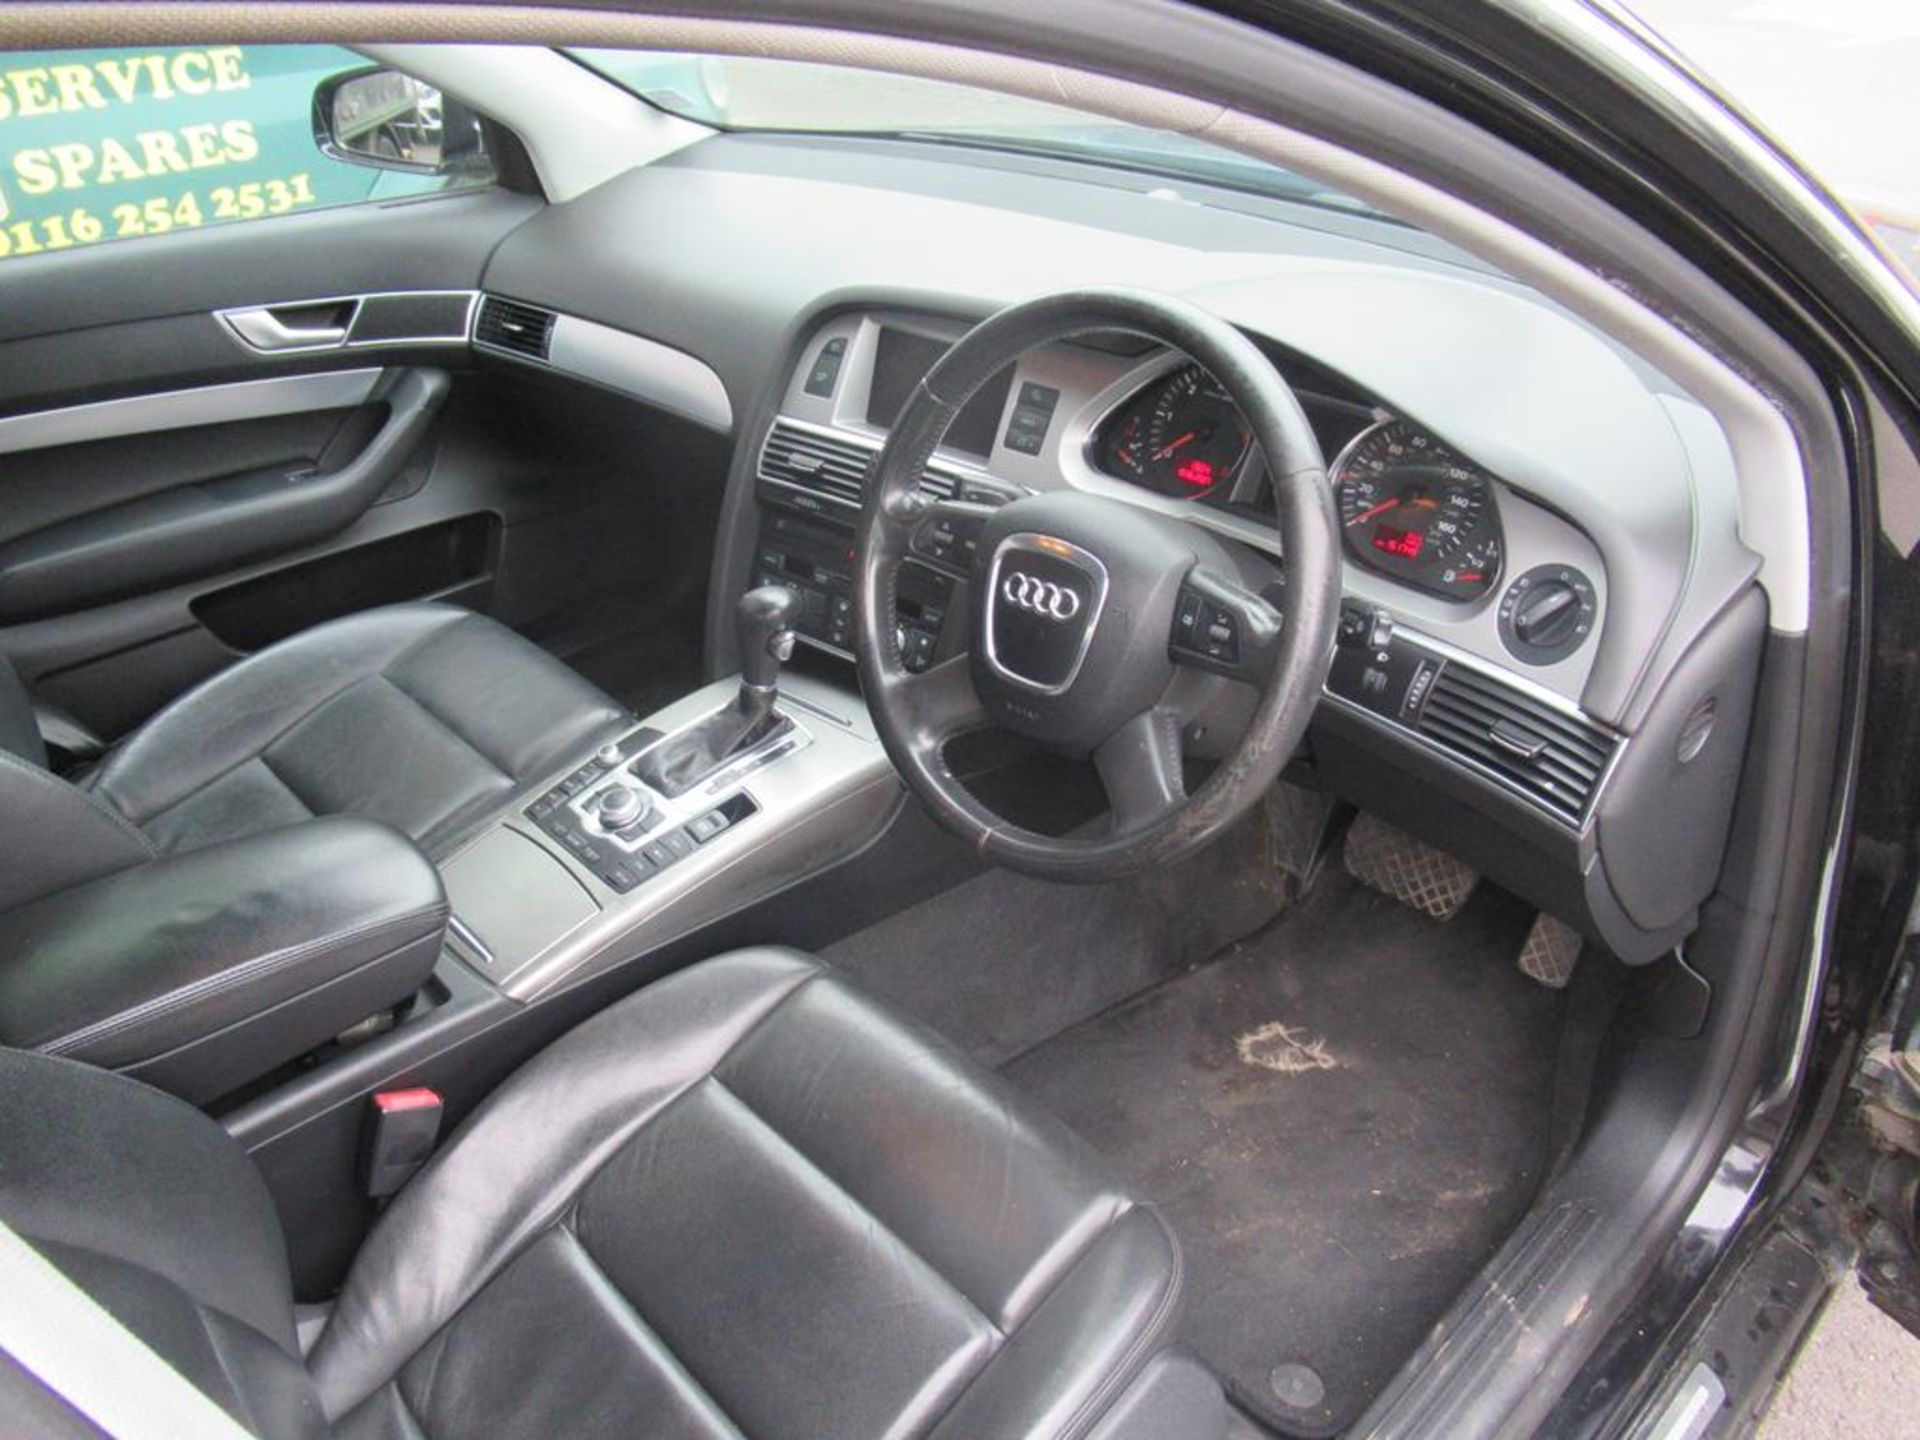 Audi A6 2.7TDI automatic with SatNav and bluetooth - Image 9 of 16